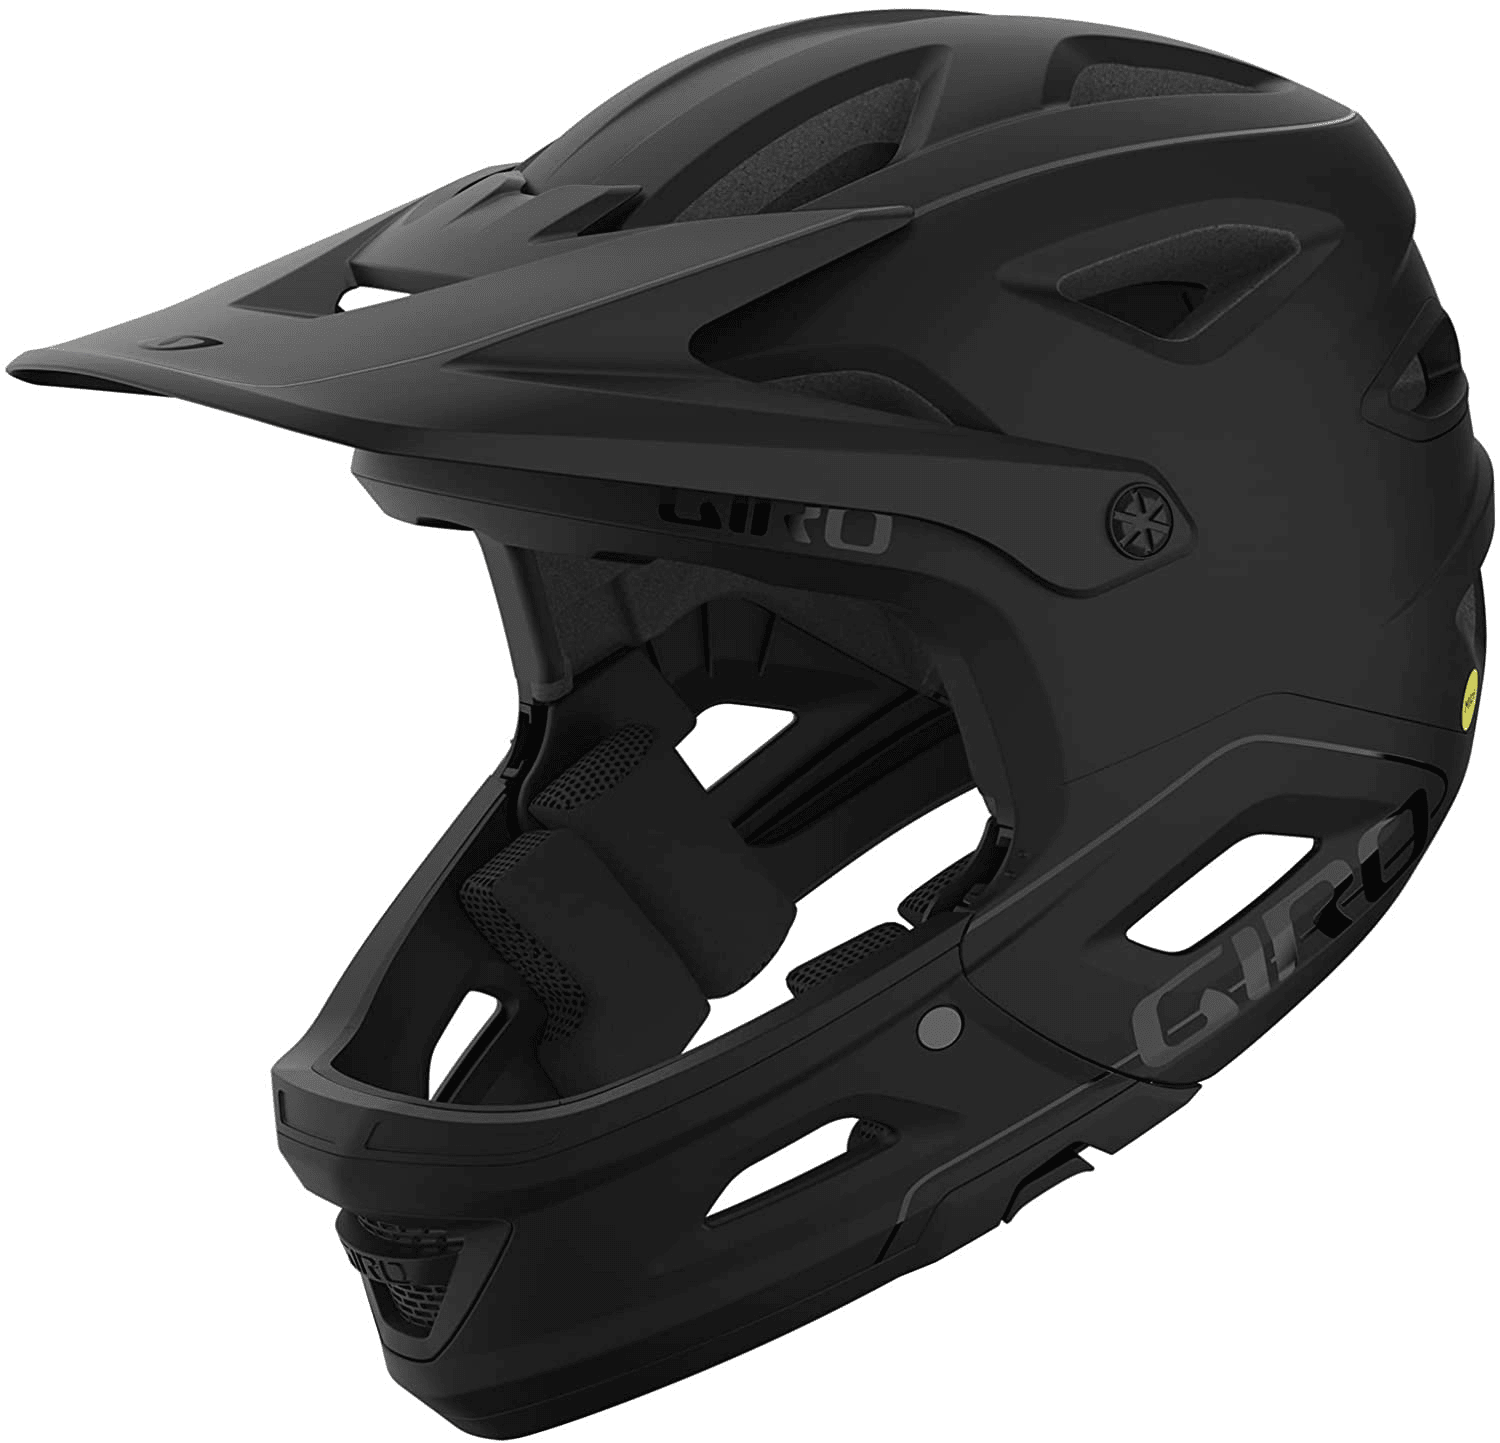 The quality of mountain bike armor like this helmet, is qualified through special testing.